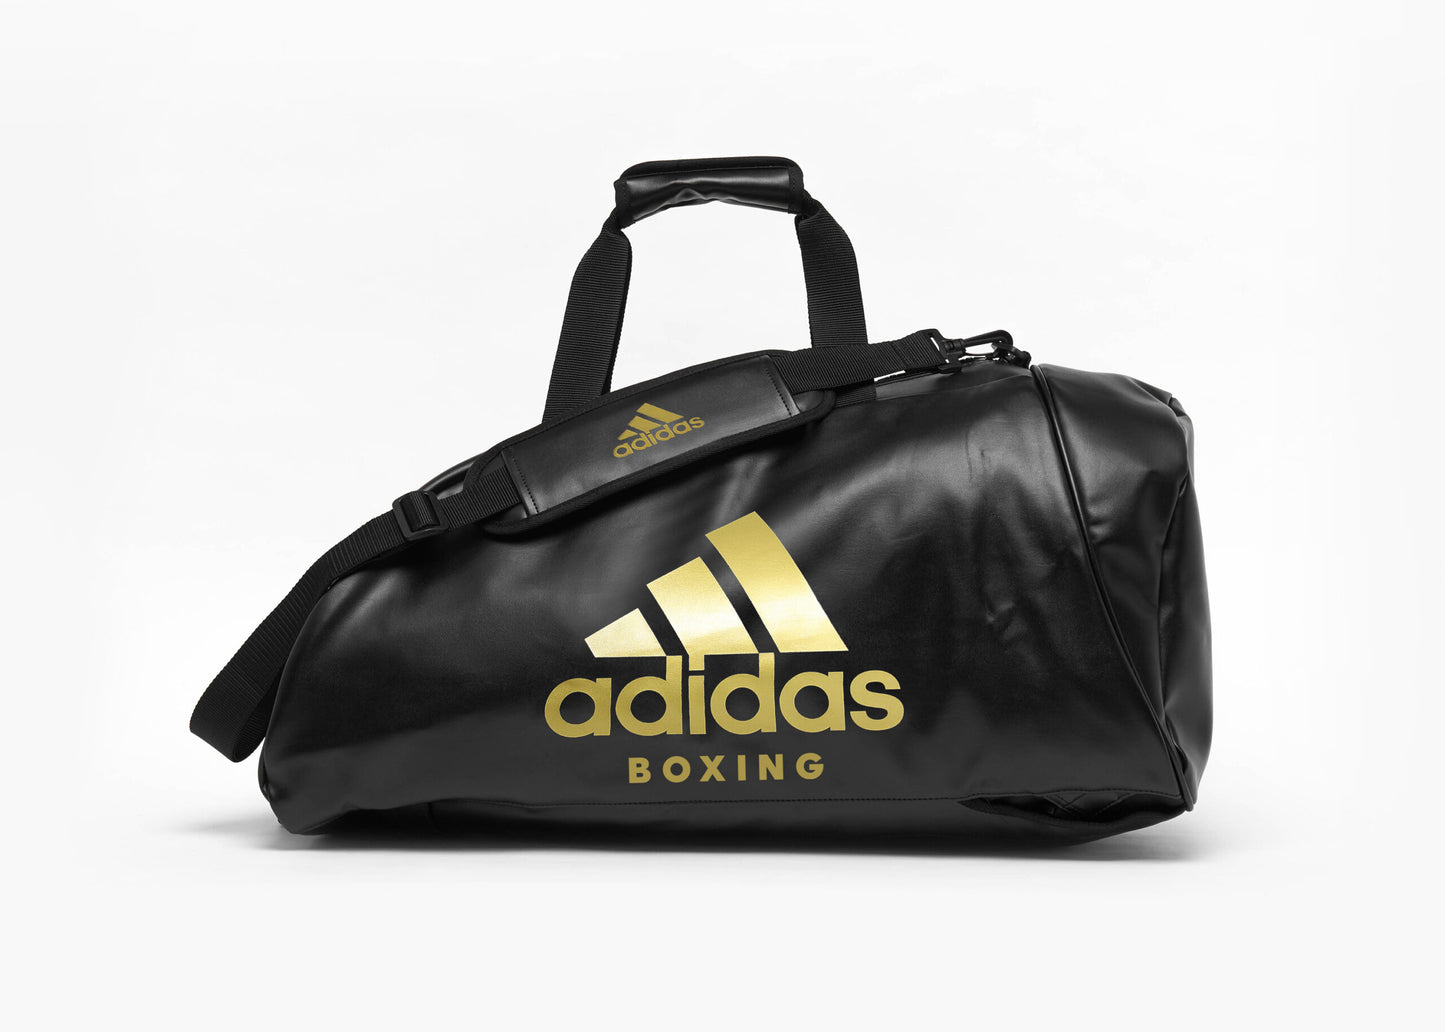 Adiacc051 2in1 Bag Black Gold Front Boxing